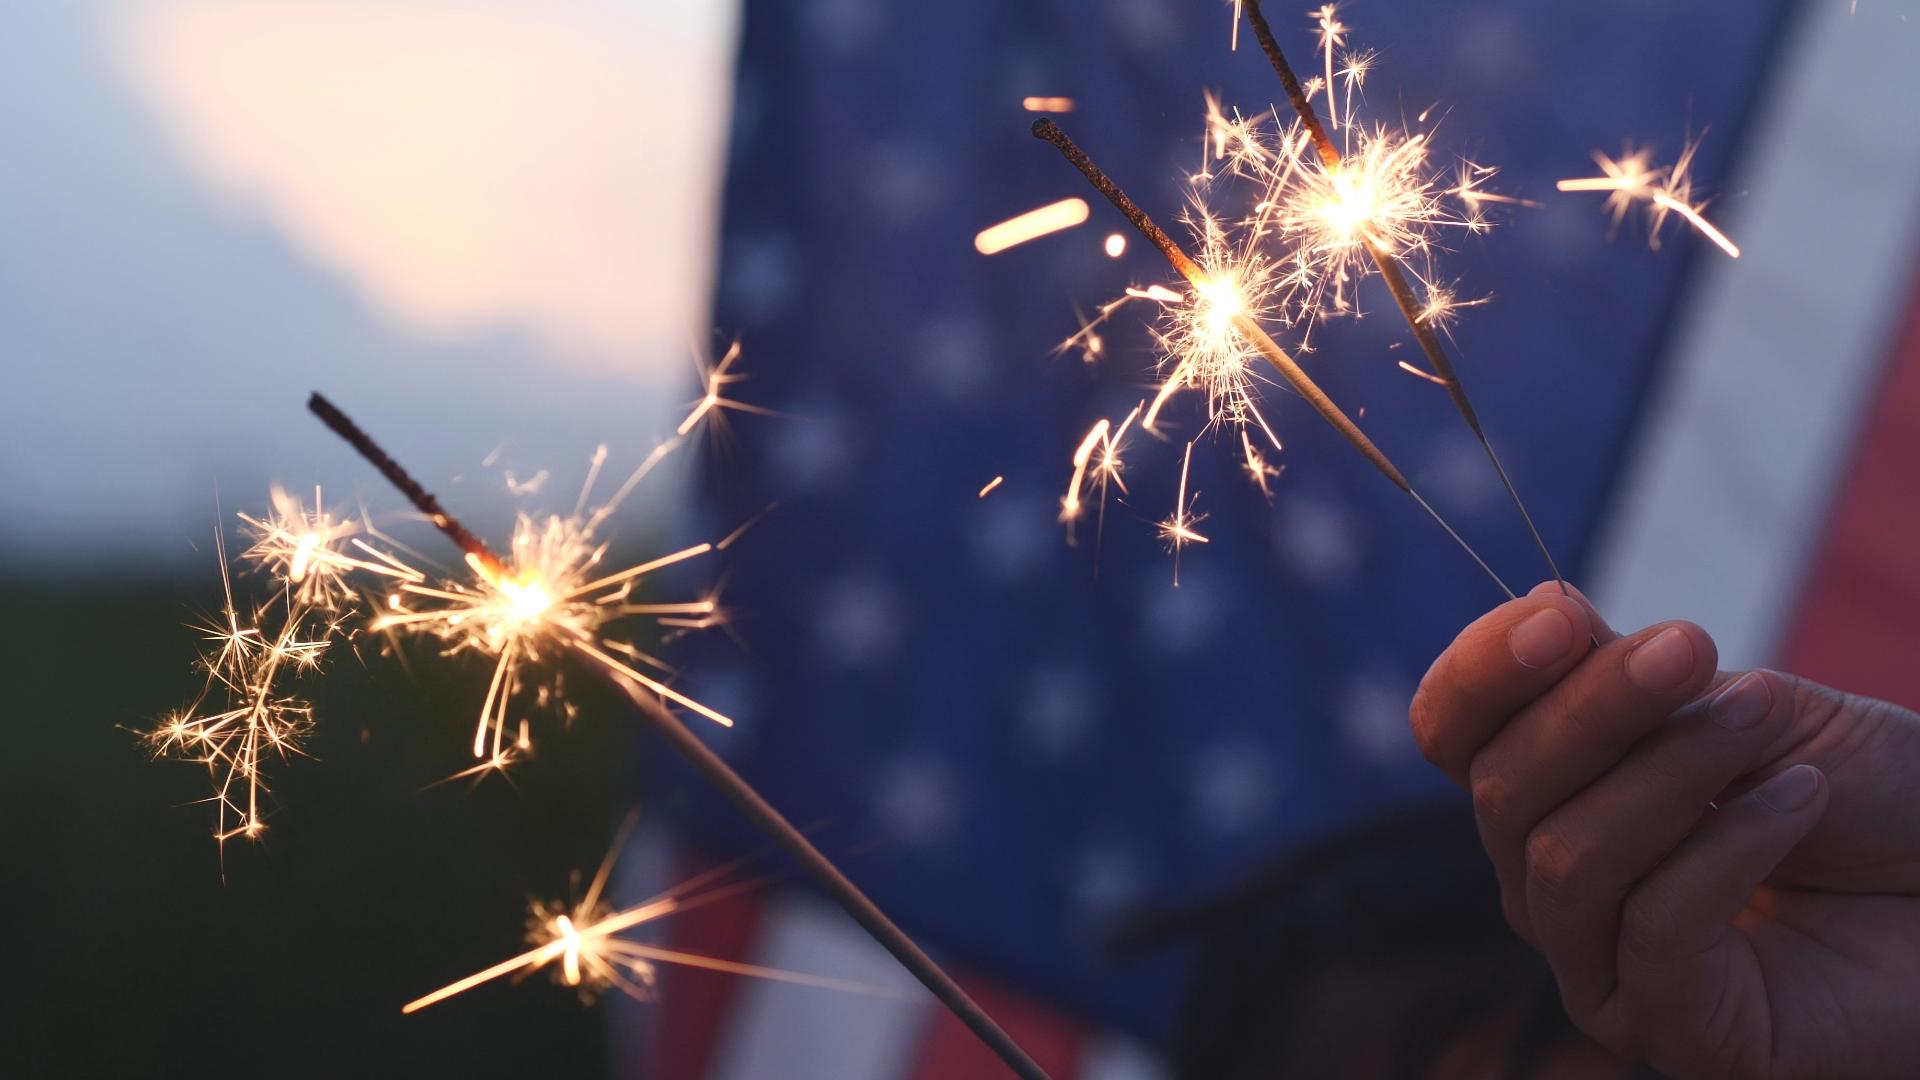 Maine emergency and health officials shared tips on how to safely launch fireworks and avoid dangerous situations if you're traveling on the road.